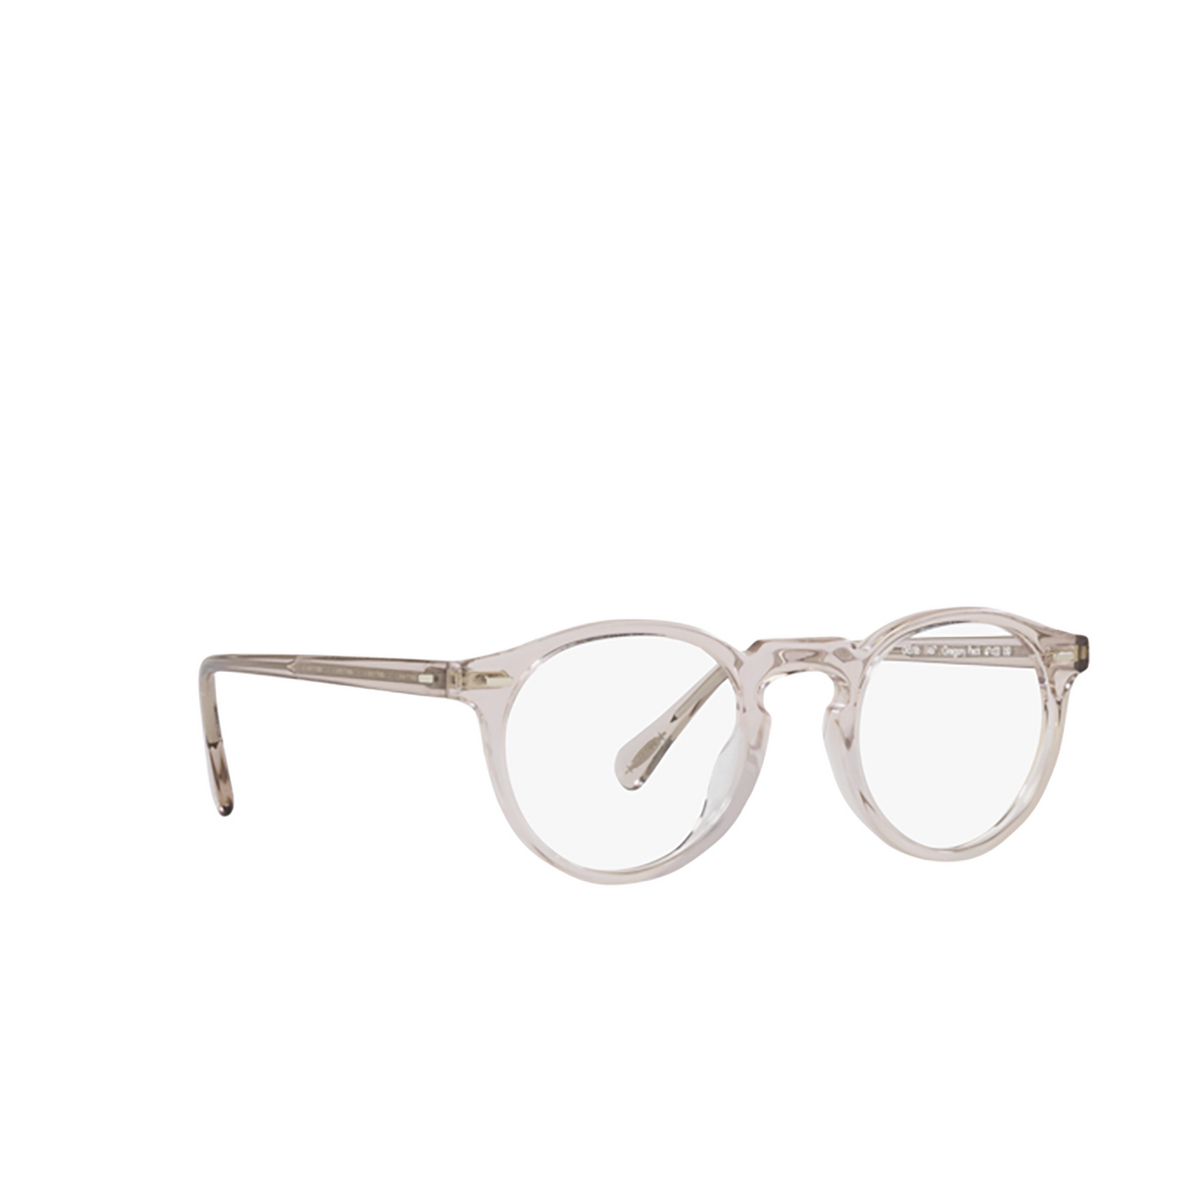 Oliver Peoples GREGORY PECK Eyeglasses 1467 Dune - three-quarters view